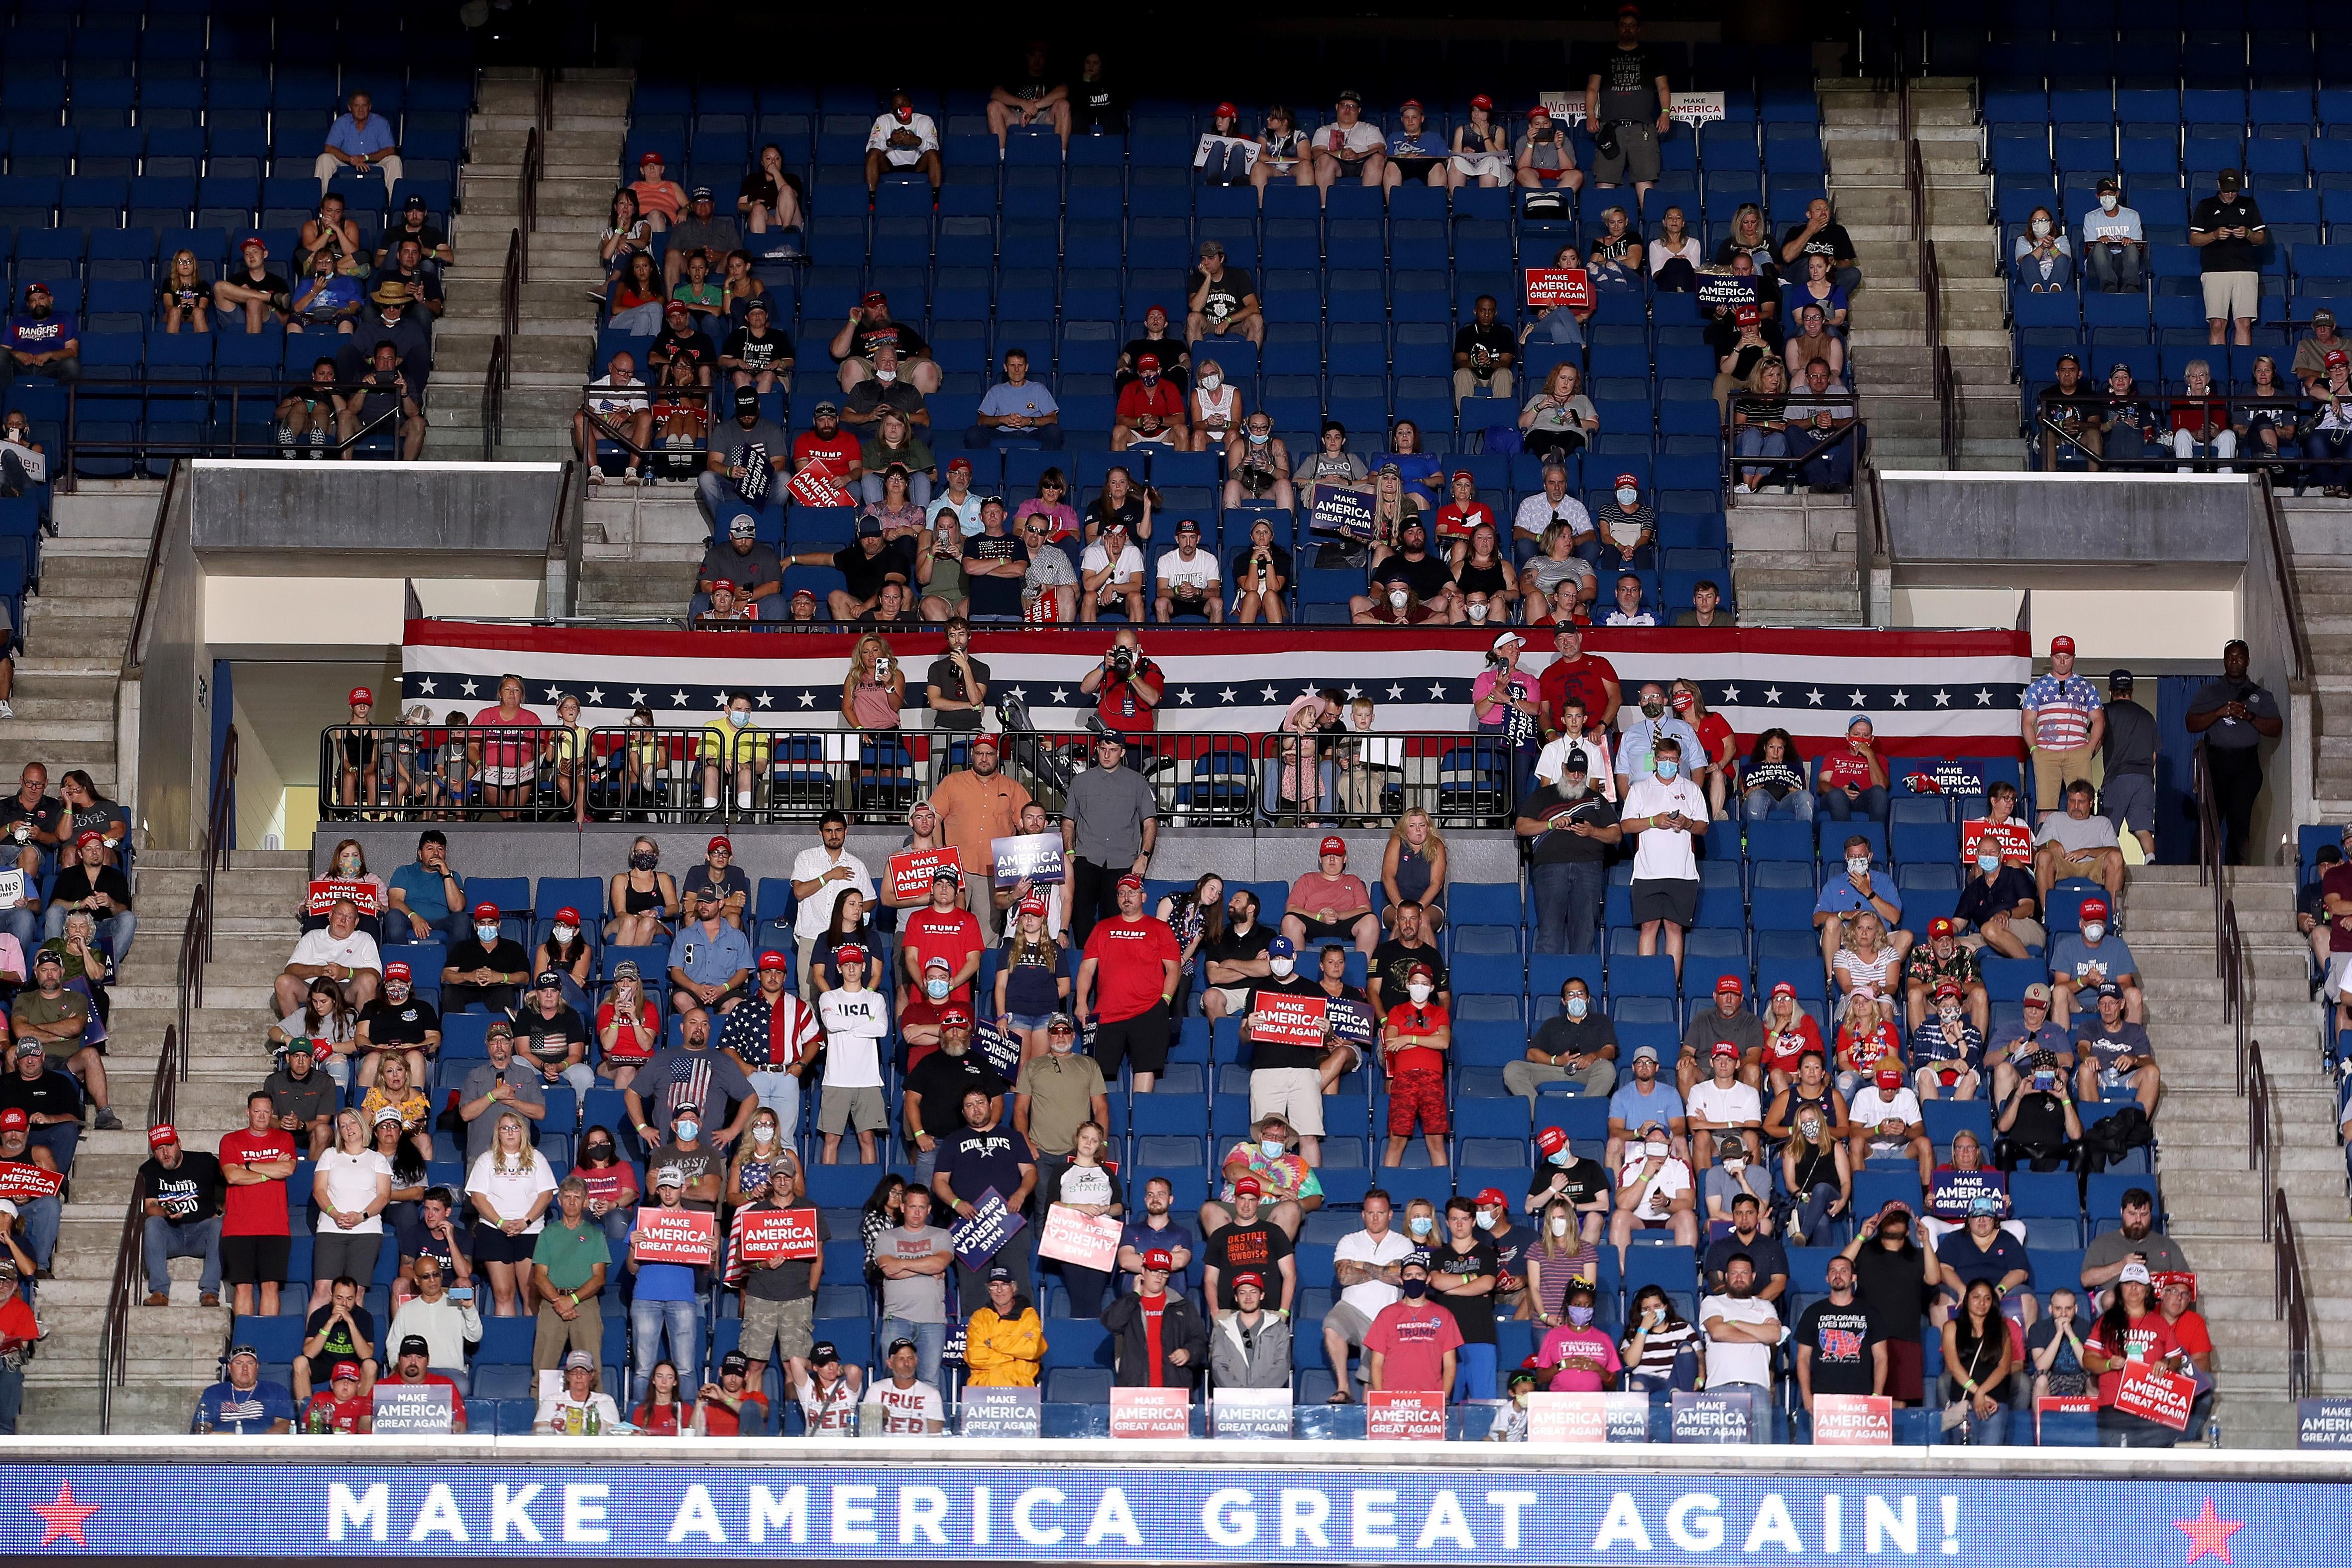 Trump supporters sit in the stands. There are many empty seats.